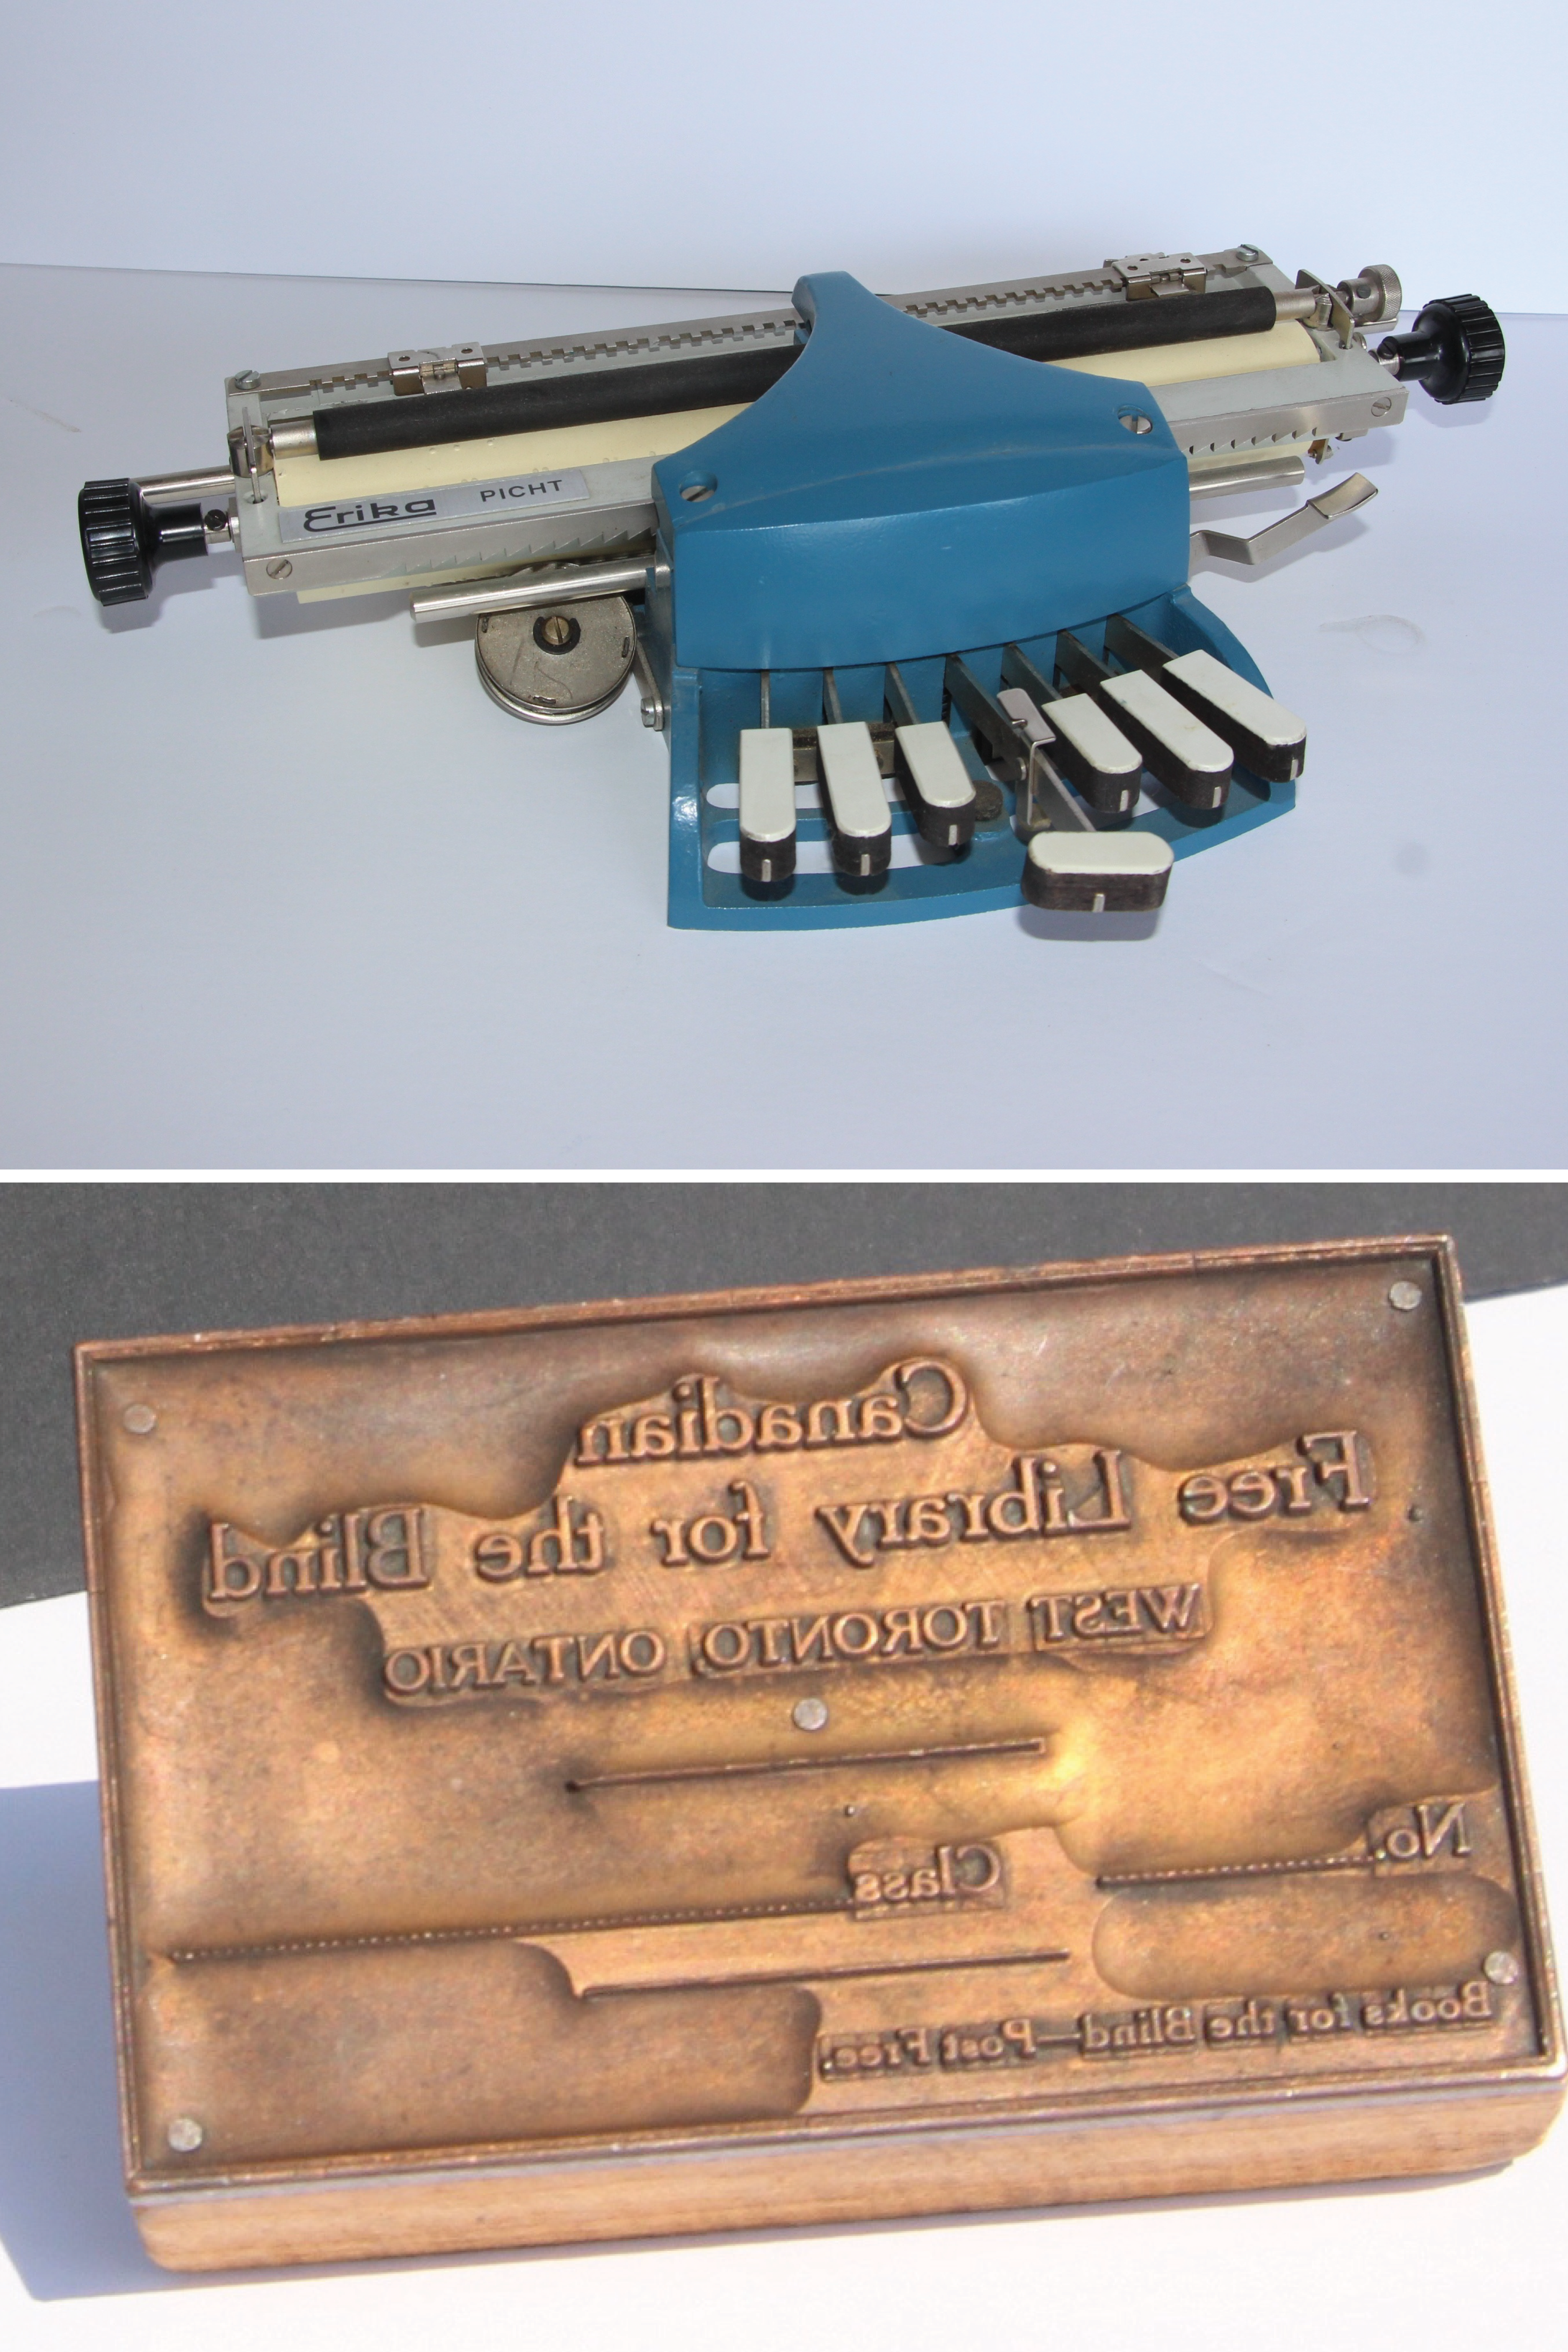 Top: Erika picht portable braillewriter ca. 1960. Bottom. Canadian Free Library for the Blind ca. 1910 – brass plate for stamping books. Plate reads: Canadian Free Library for the Blind, West Toronto Ontario No. Class. Books for Blind – Post Free. 